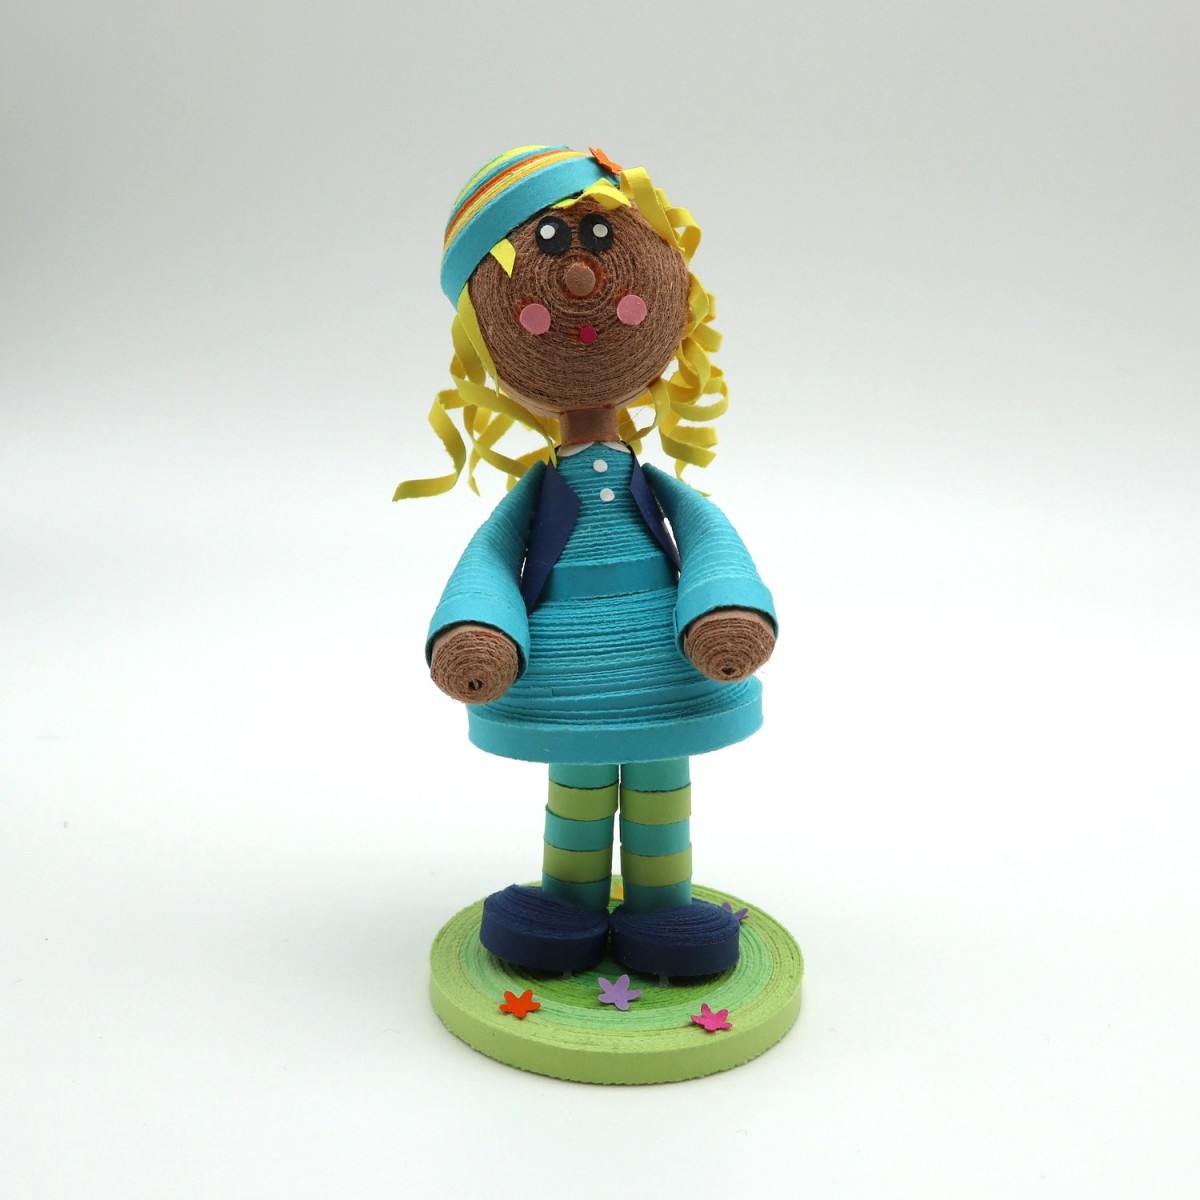 robuschi personnage quilling 2021-11-13